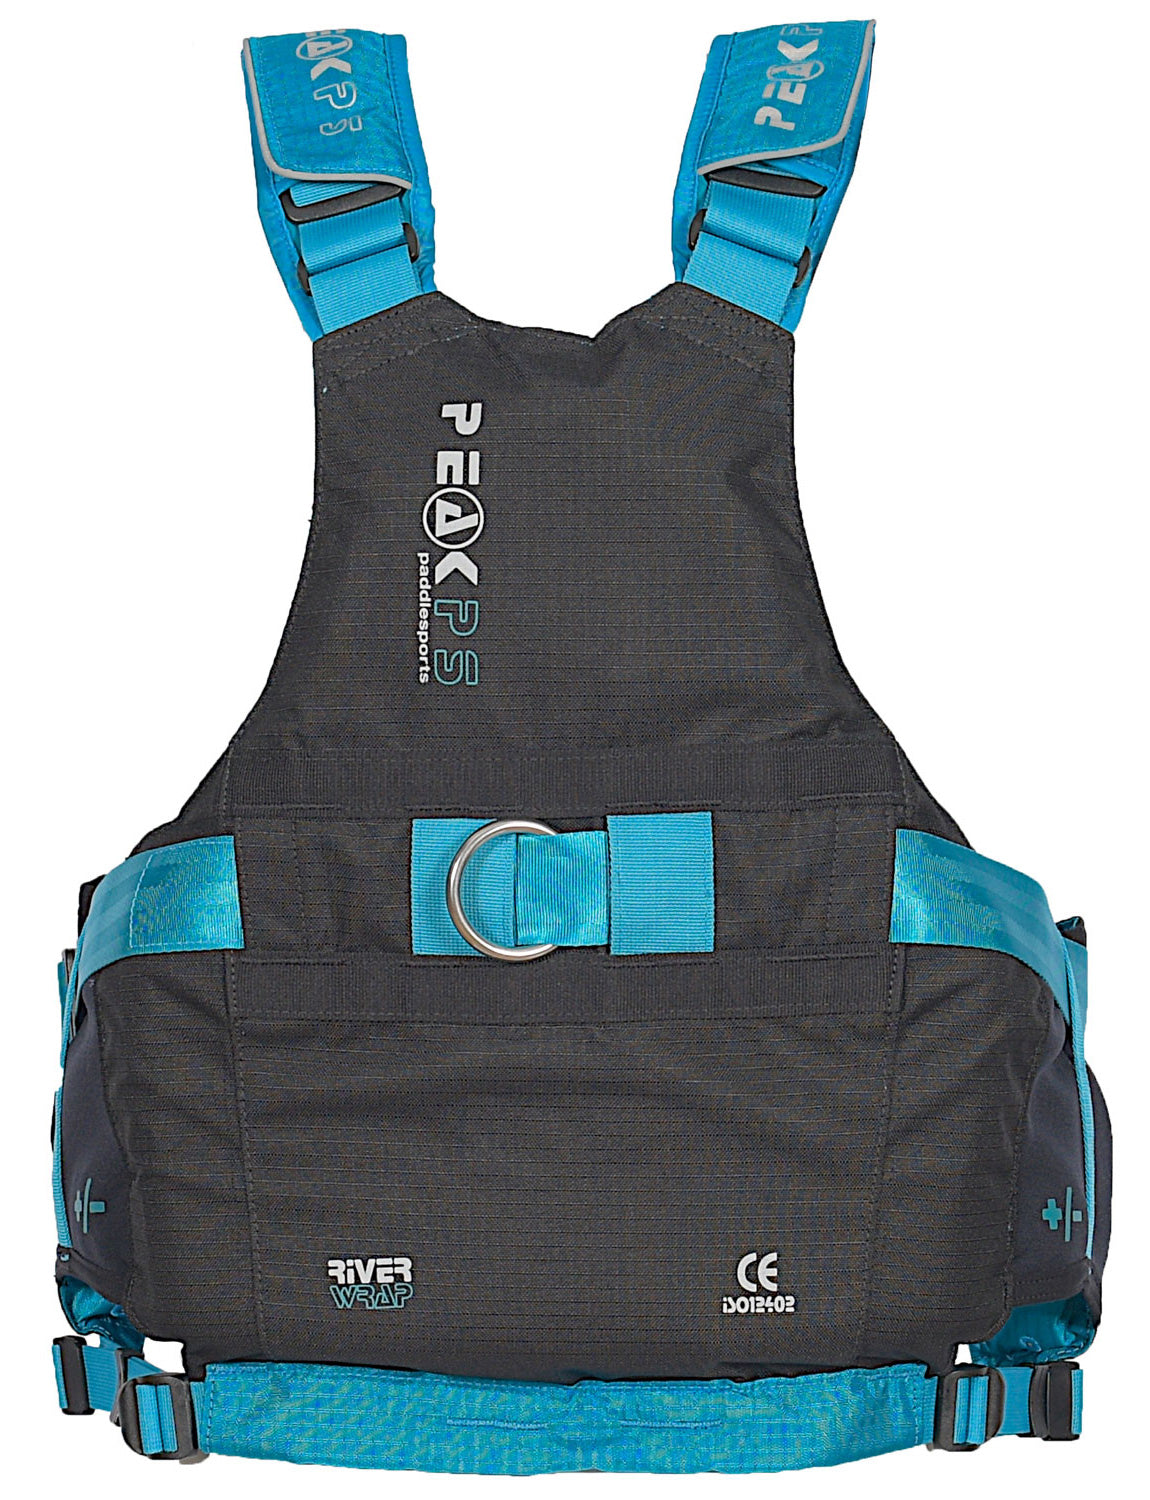 Peak River wrap in black from the rear with chest harness